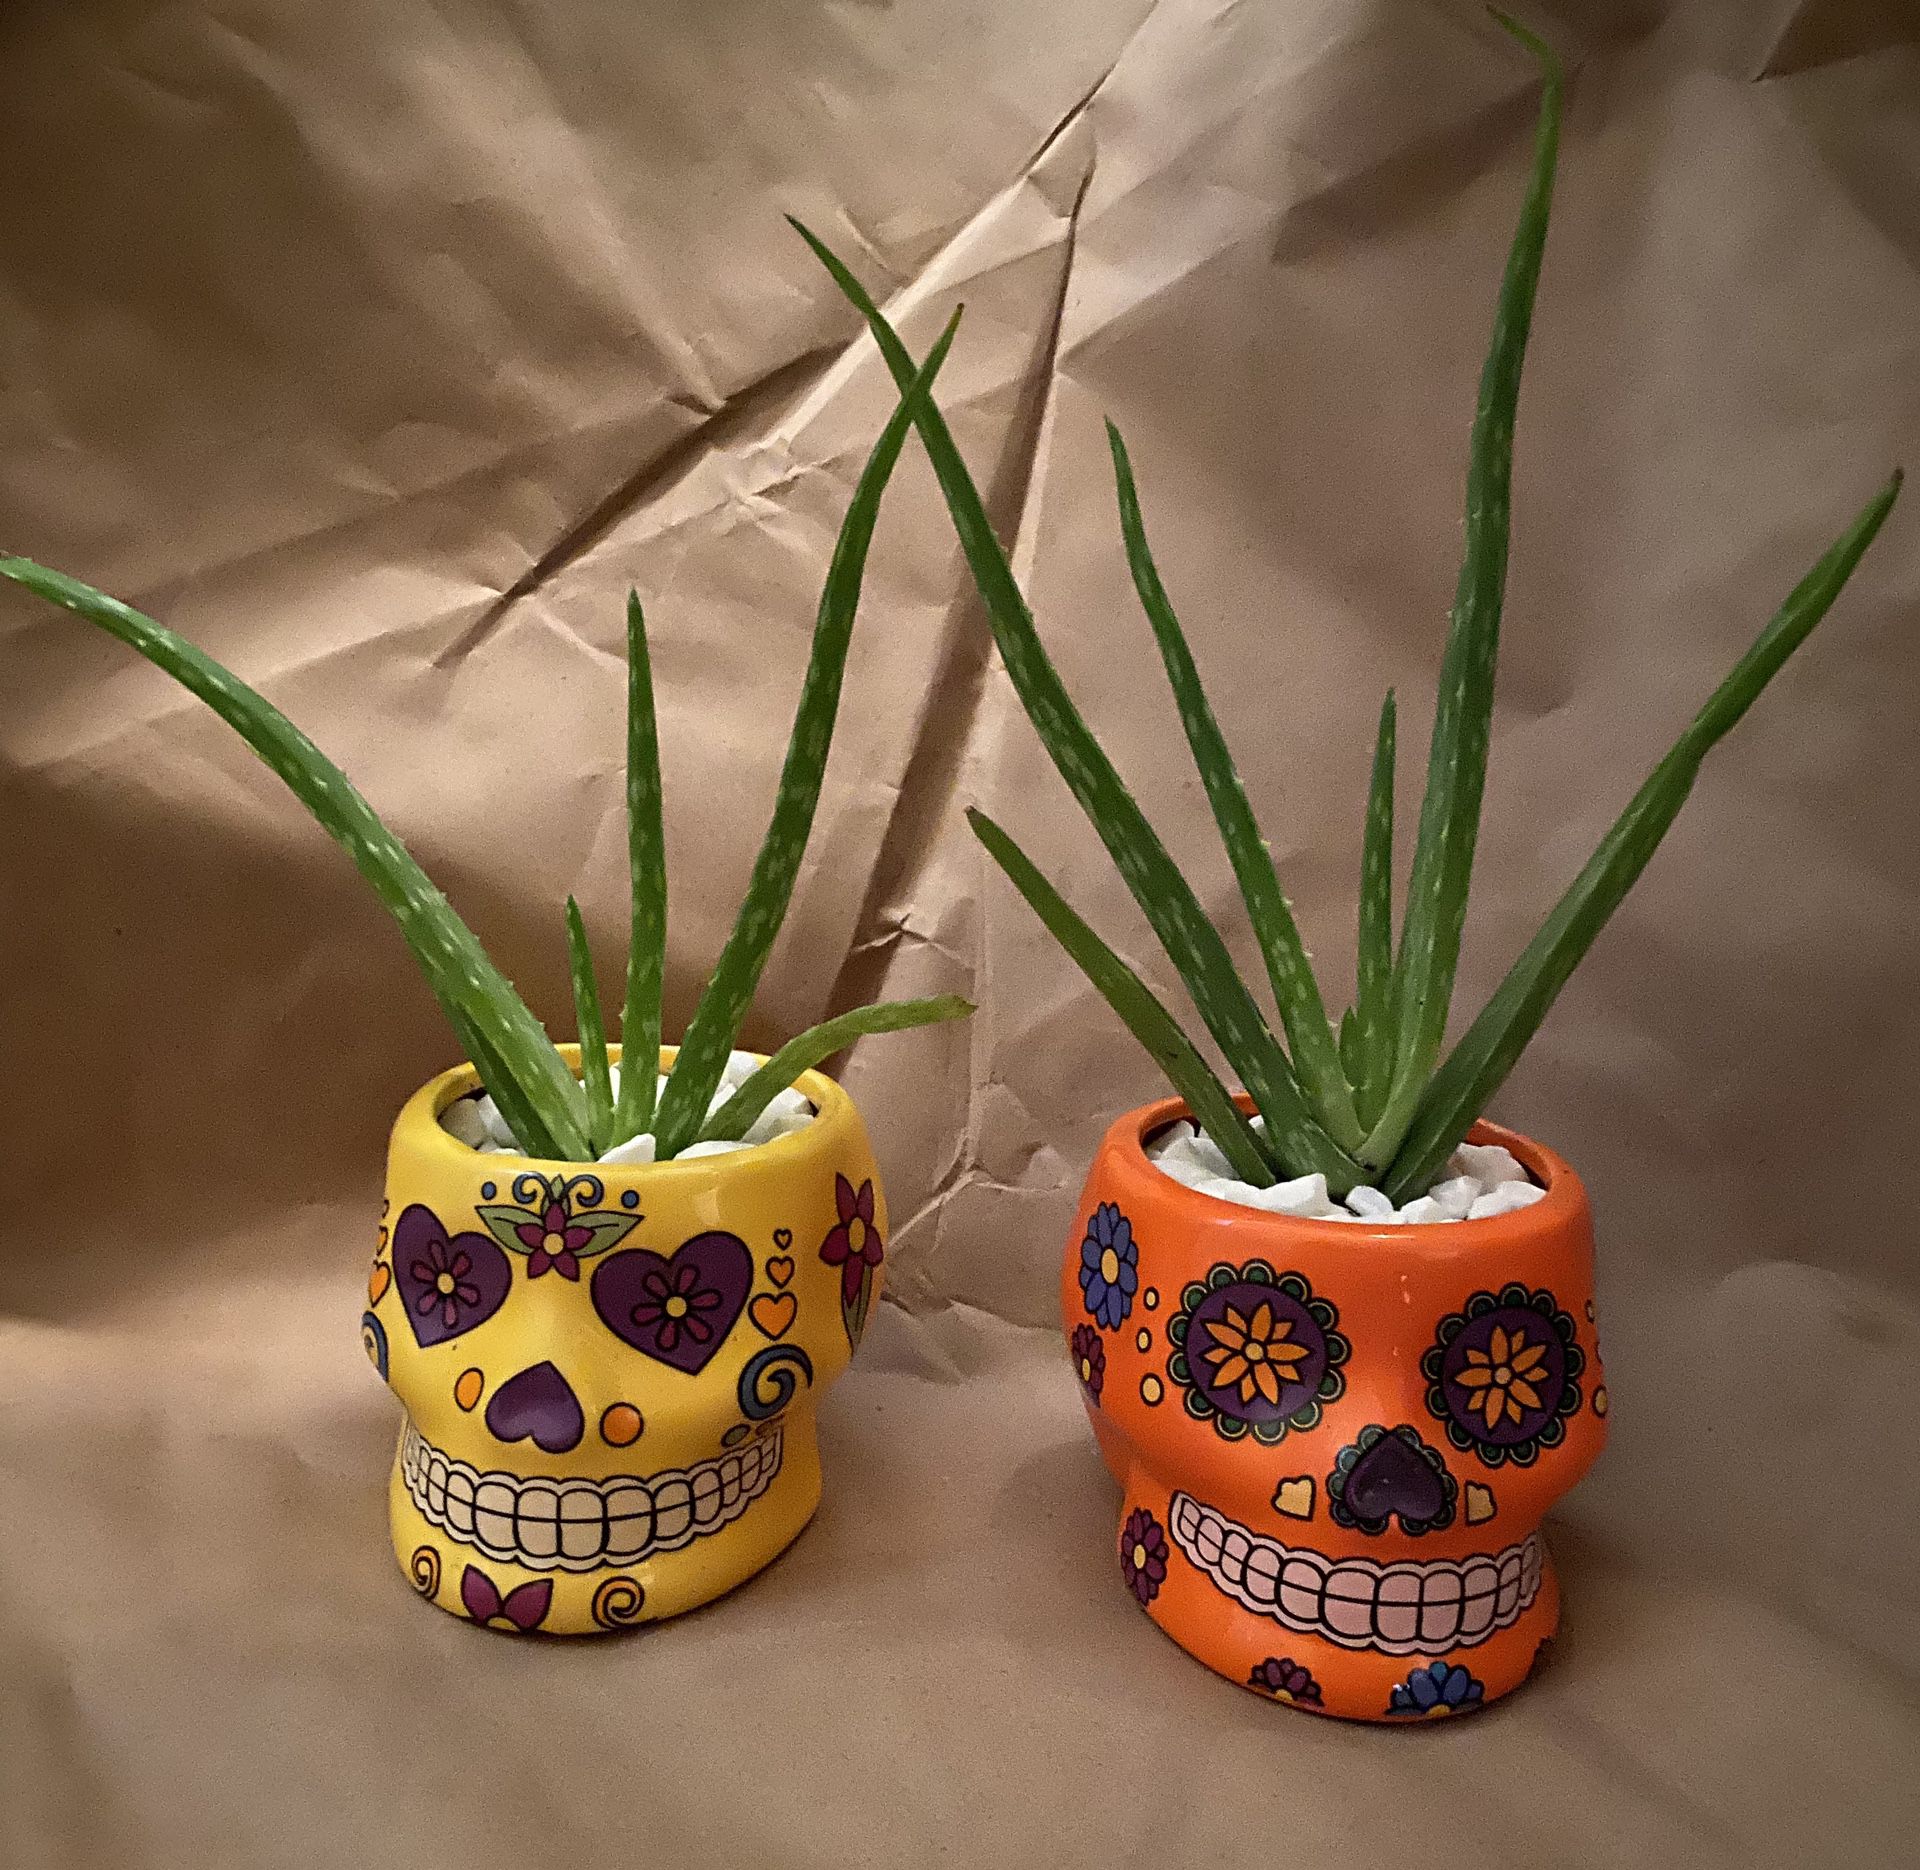 Two rooted aloe vera plants in decorative pots